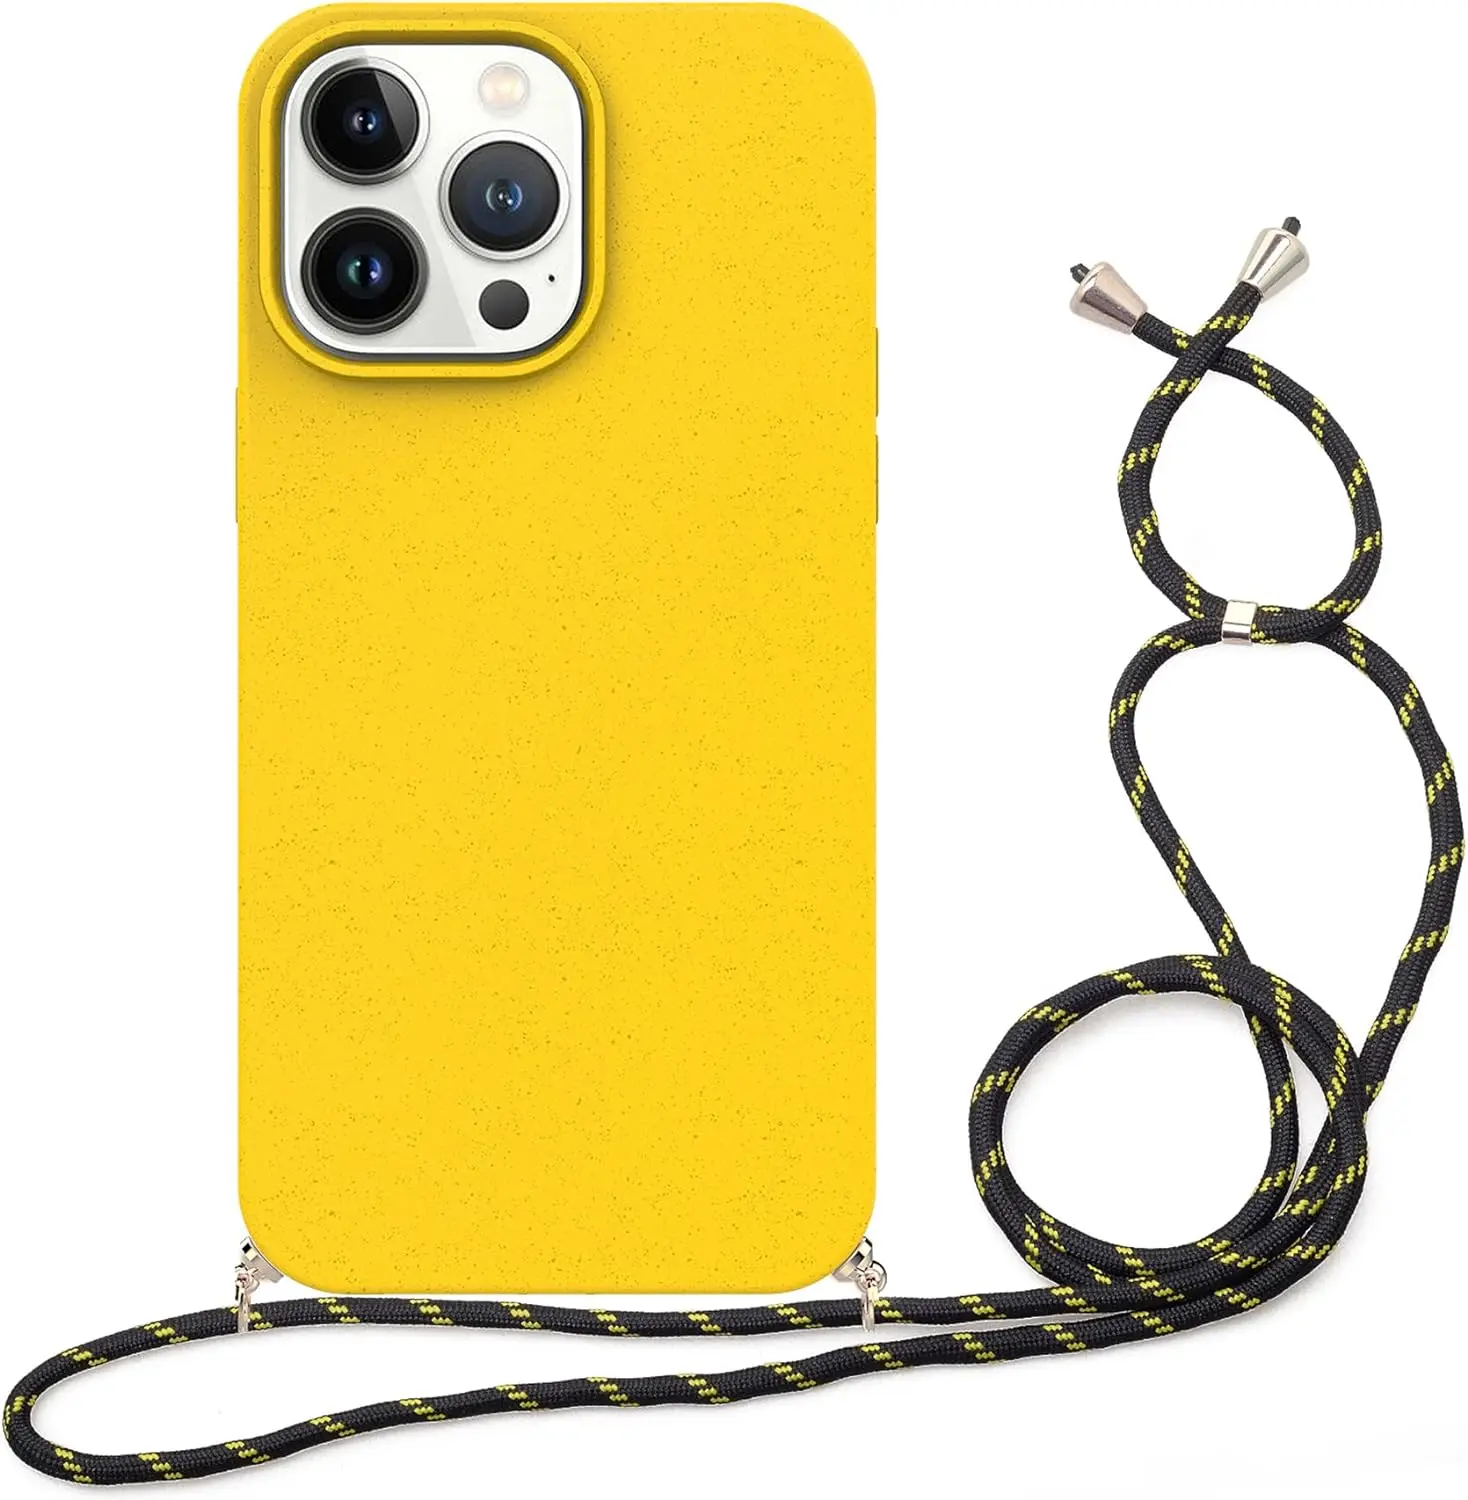 Lanyard Universal Adjustable Neck Strap case yellow Wheat Straw Recycle Eco Friendly Biodegradable Phone Case